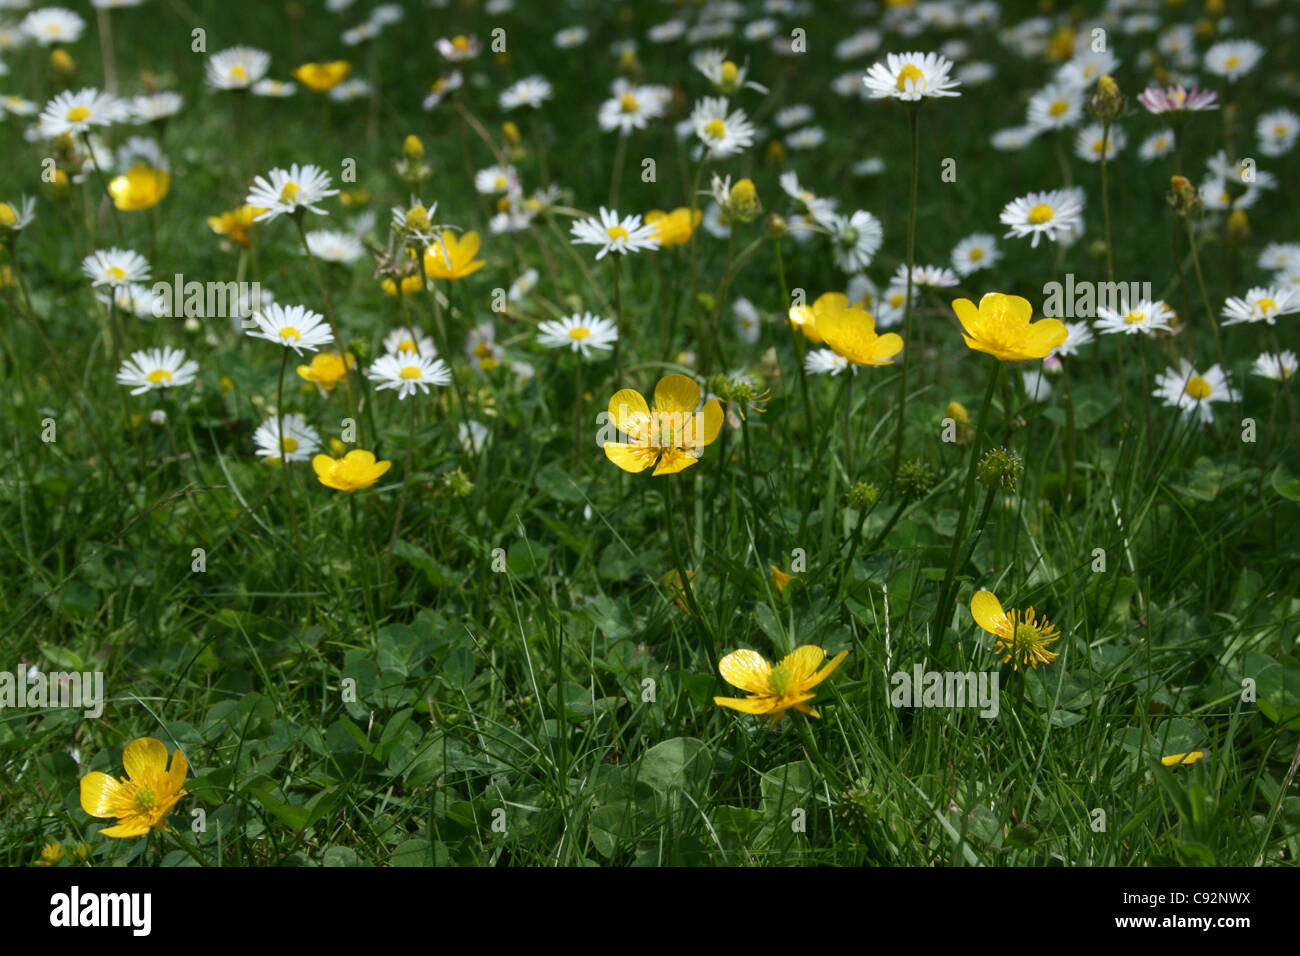 worms eye view Buttercups and daisies Stock Photo